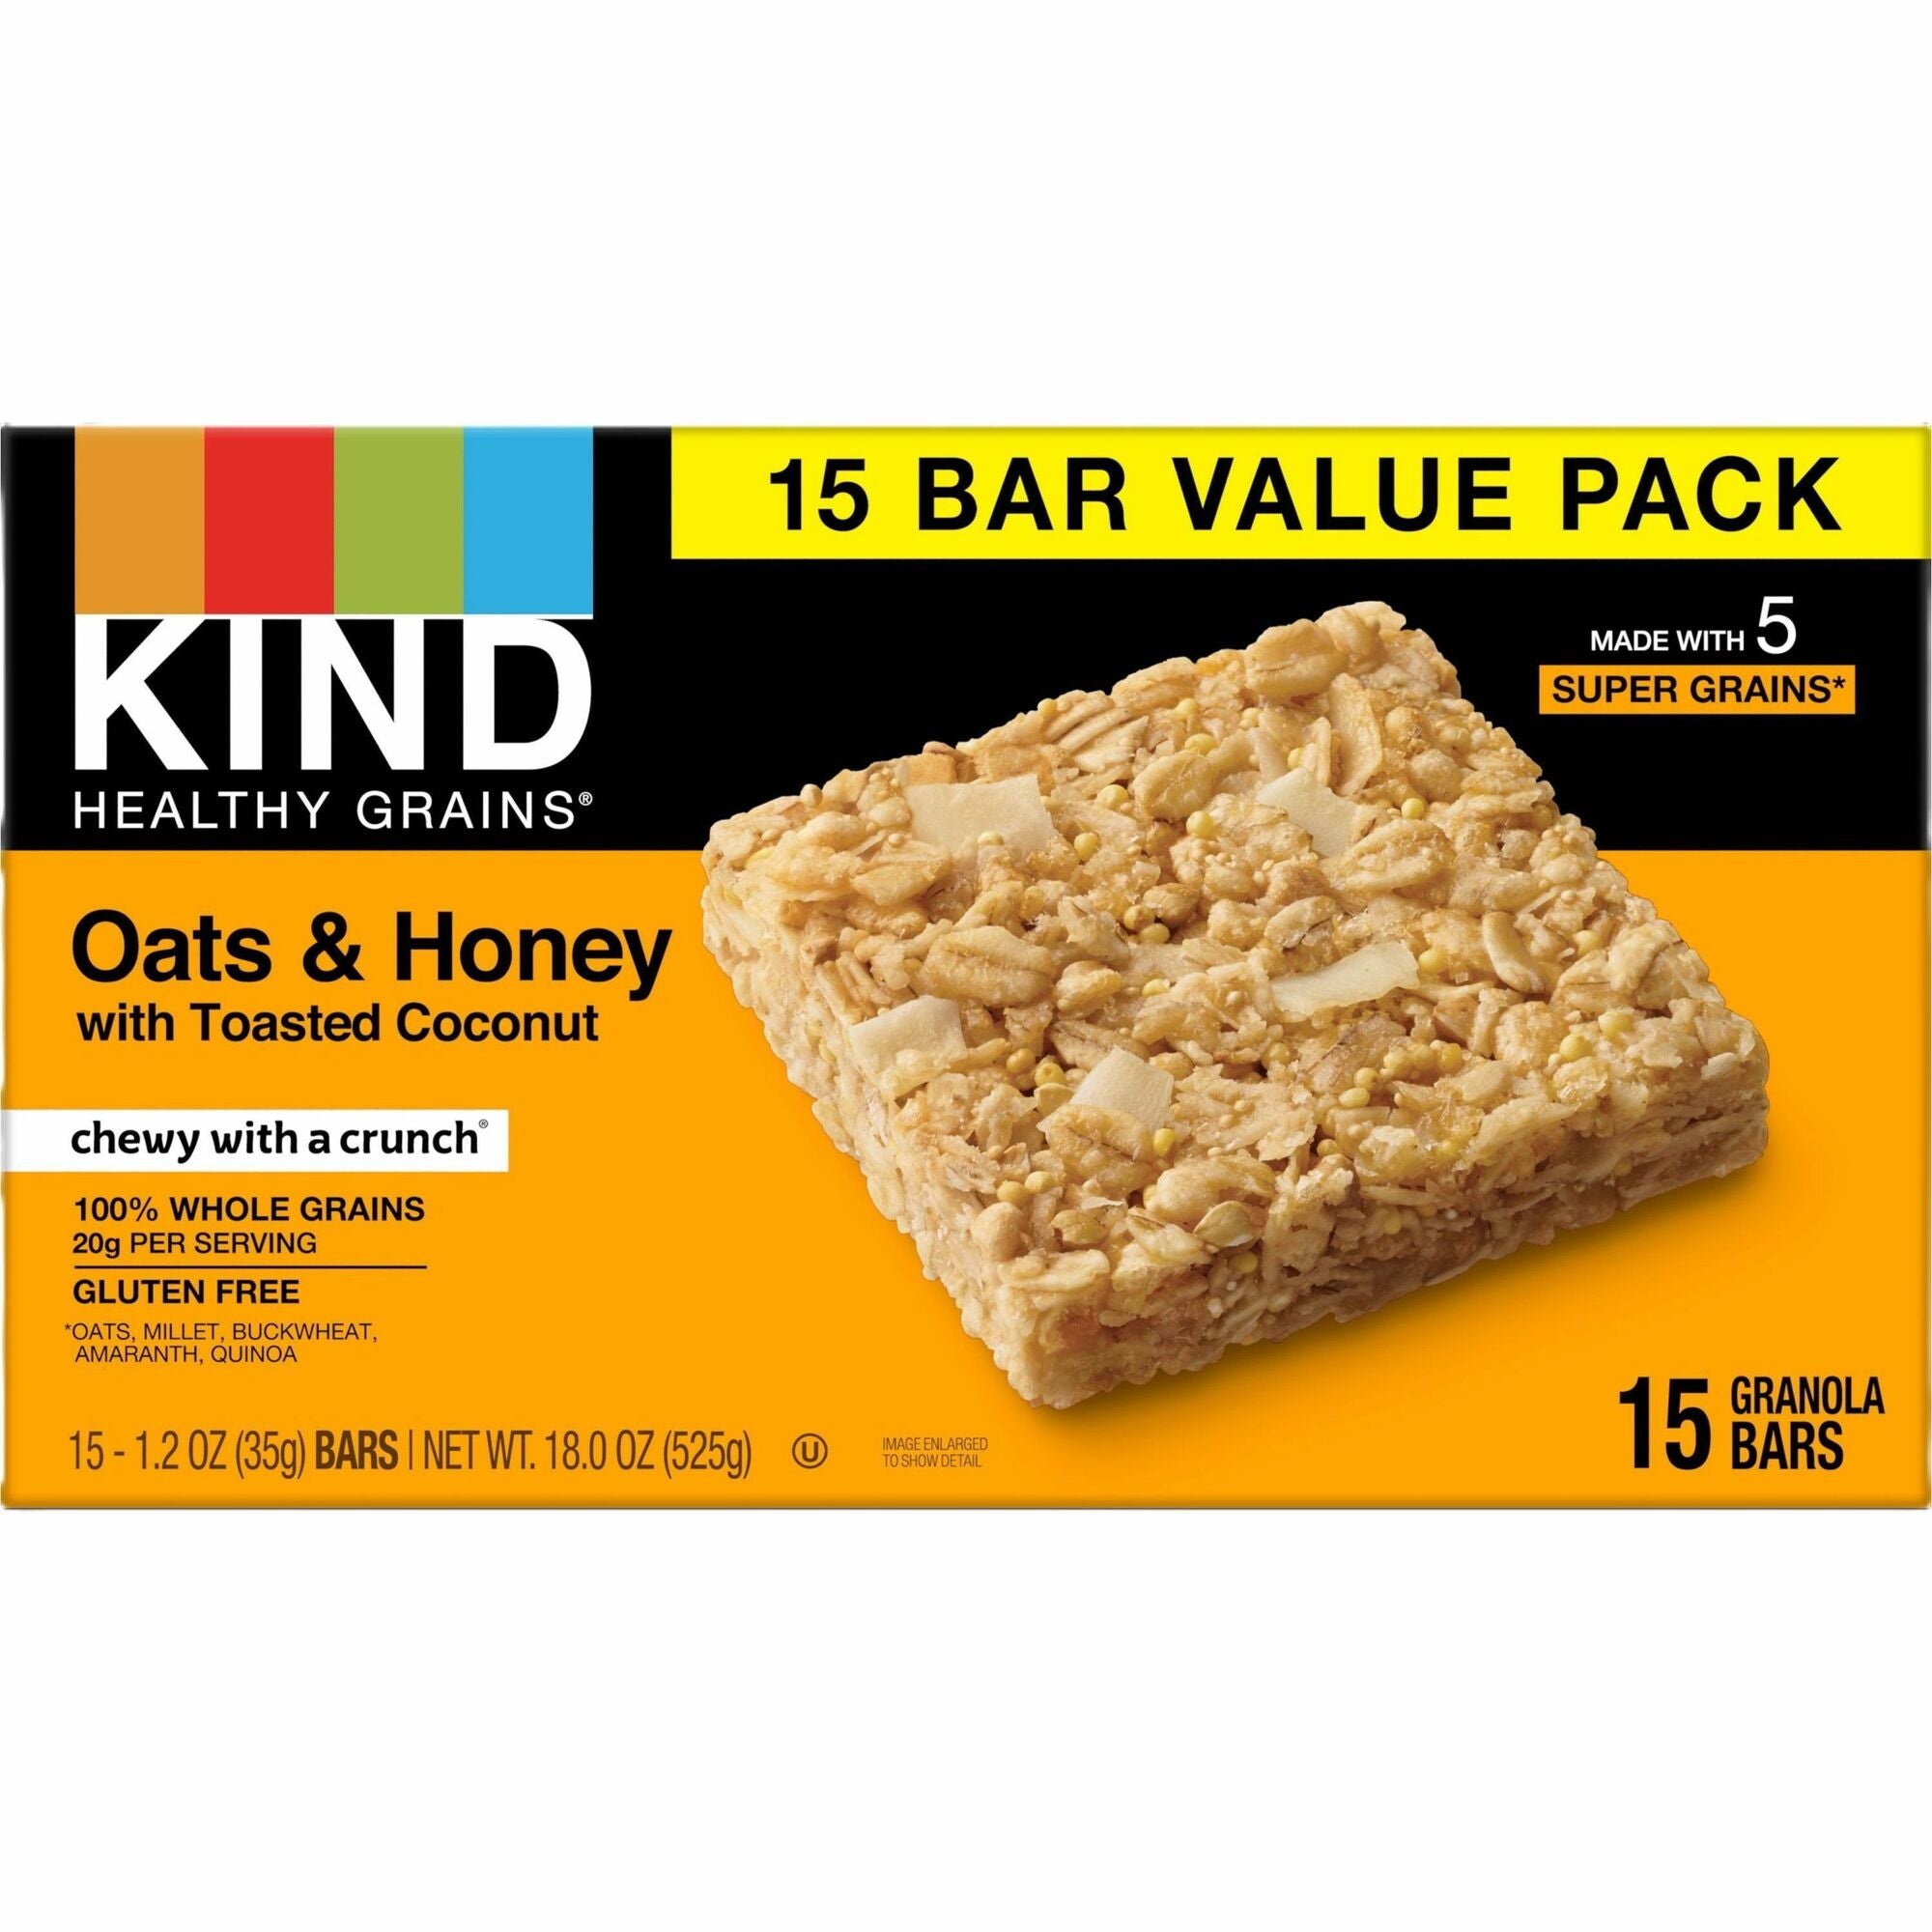 kind-healthy-grains-bars-trans-fat-free-gluten-free-low-sodium-cholesterol-free-oats-&-honey-with-toasted-coconut-120-oz-15-box_knd26825 - 1